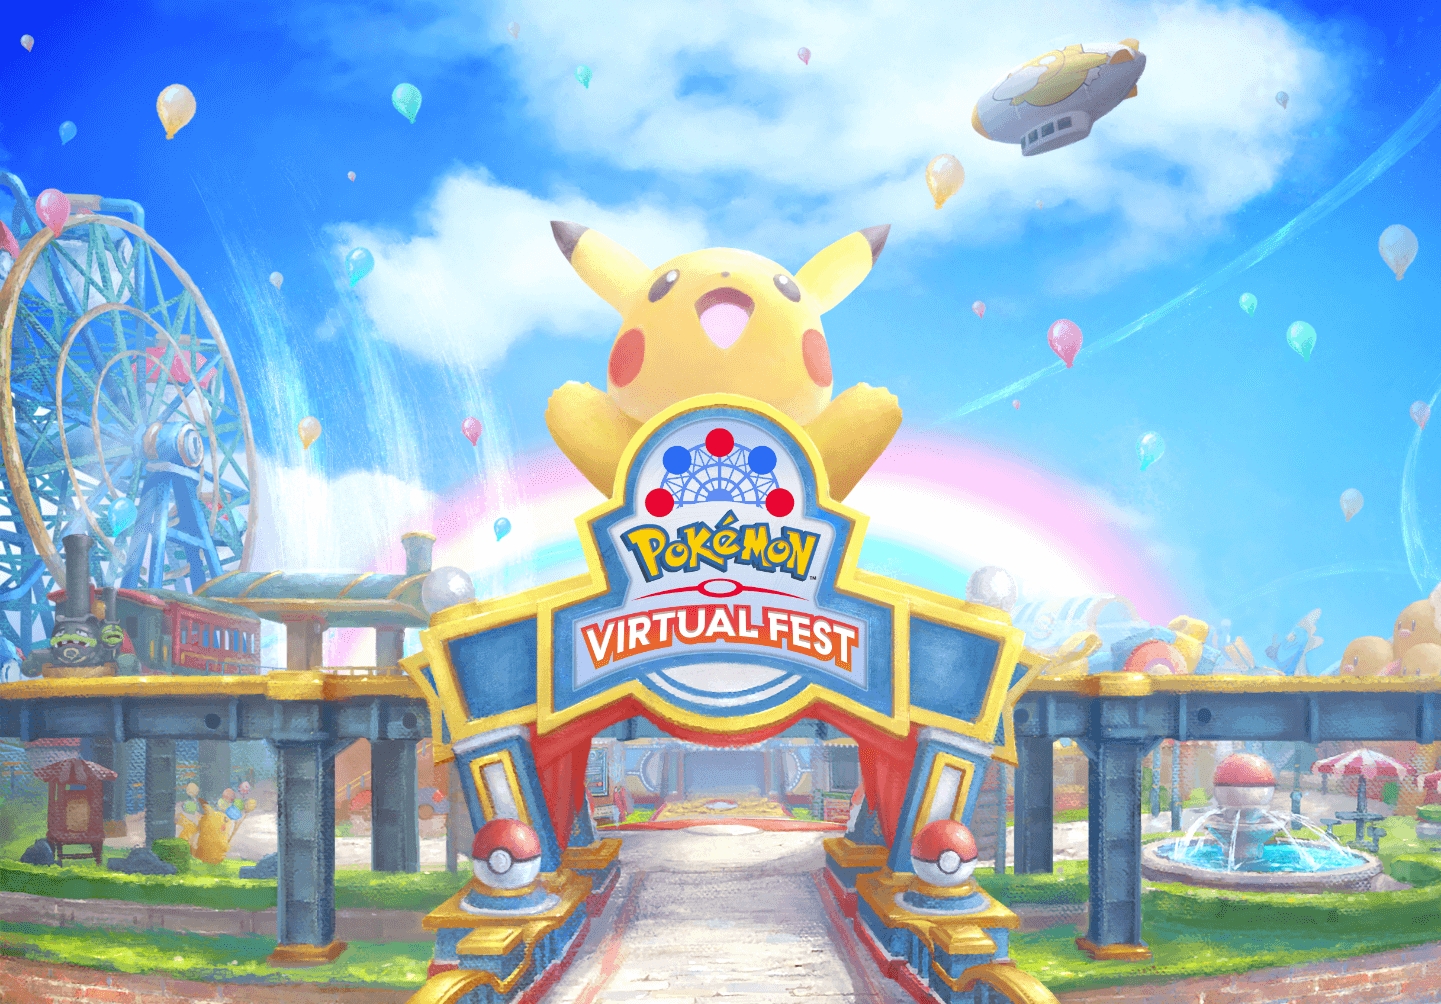 Pokémon Virtual Fest Opens In Japan With Rides, Games, And Multiplayer Options